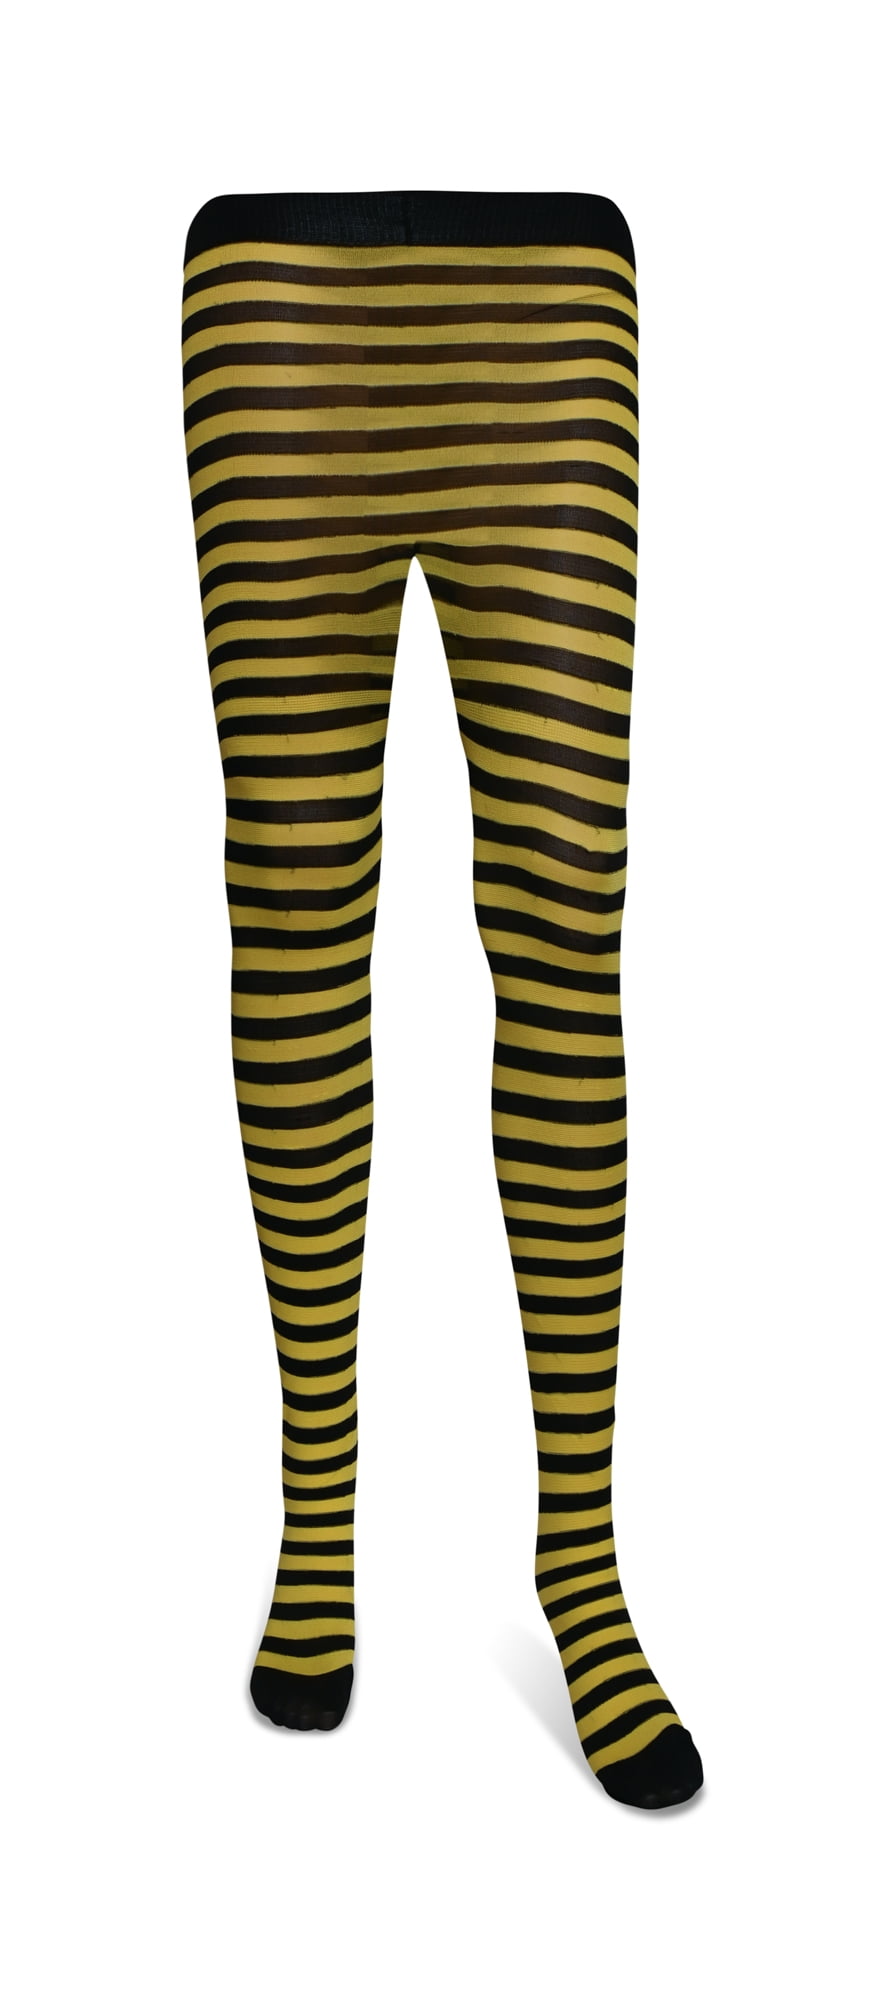 Skeleteen Black and Yellow Tights - Striped Nylon Bumble Bee Stretch  Pantyhose Stocking Accessories for Every Day Attire and Costumes for Teens  and